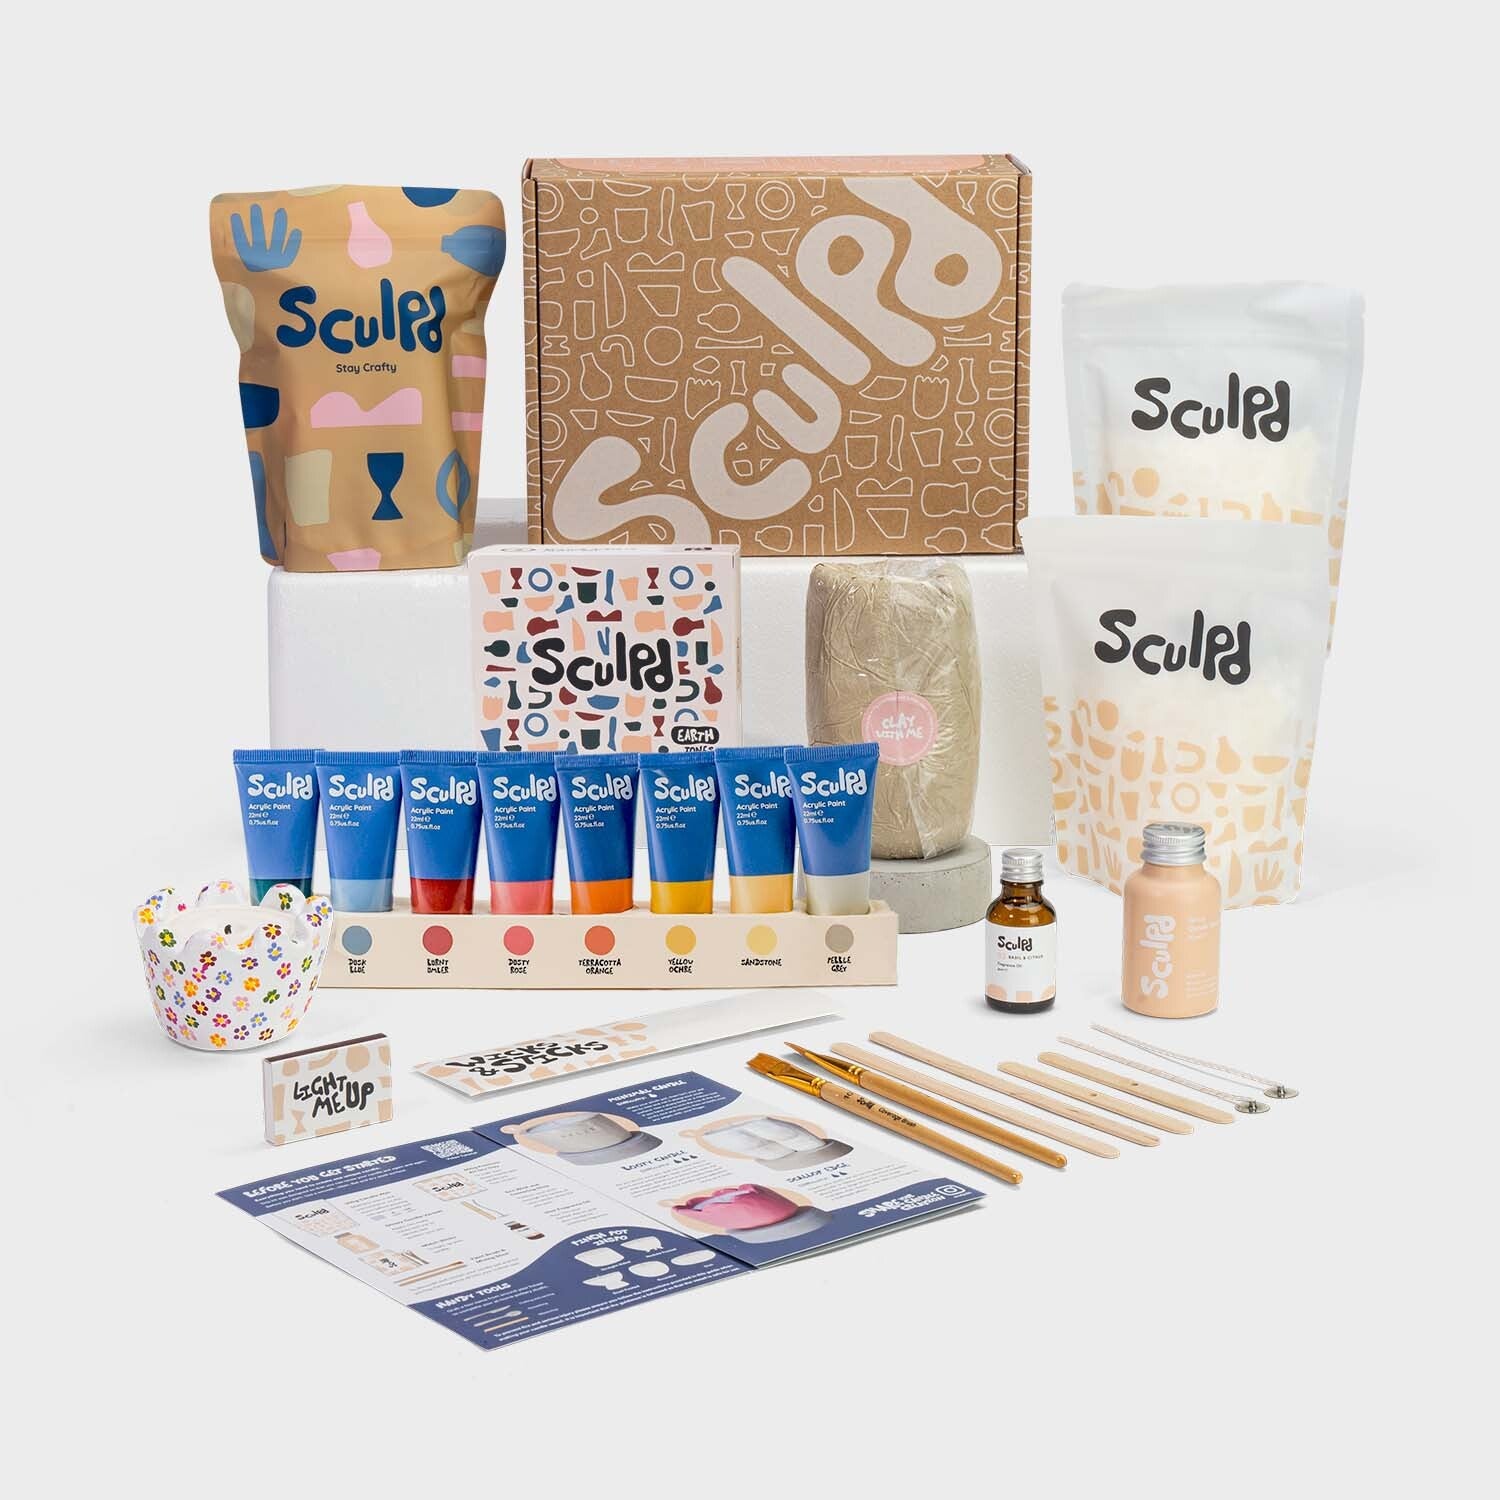  Sculpd Candle Making Pottery Kit with Air Dry Clay